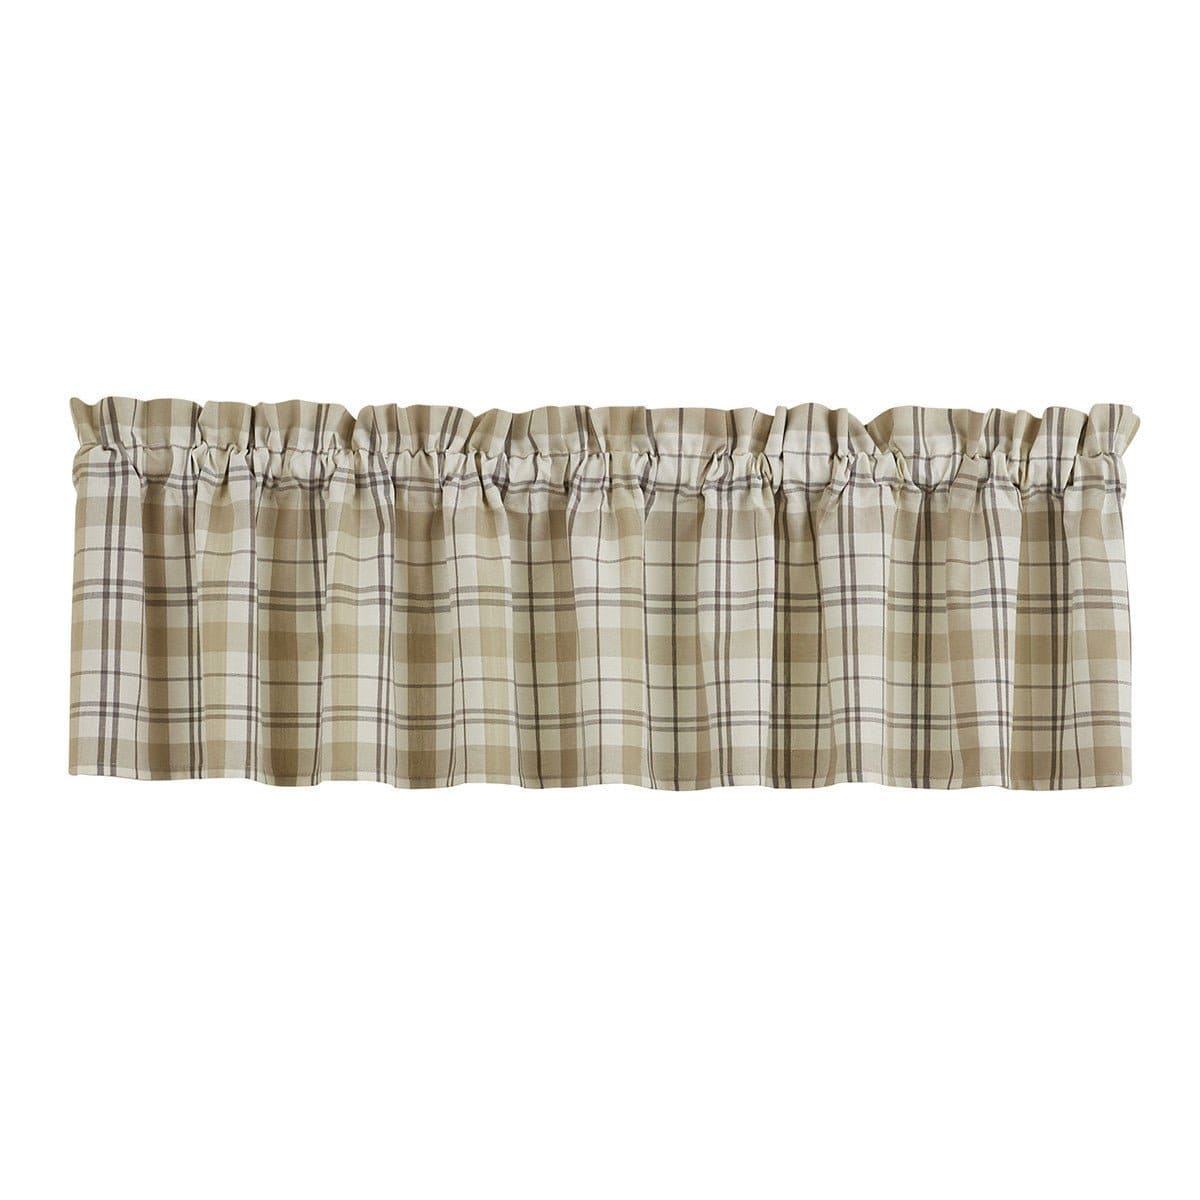 In The Meadow Plaid Valance Unlined-Park Designs-The Village Merchant